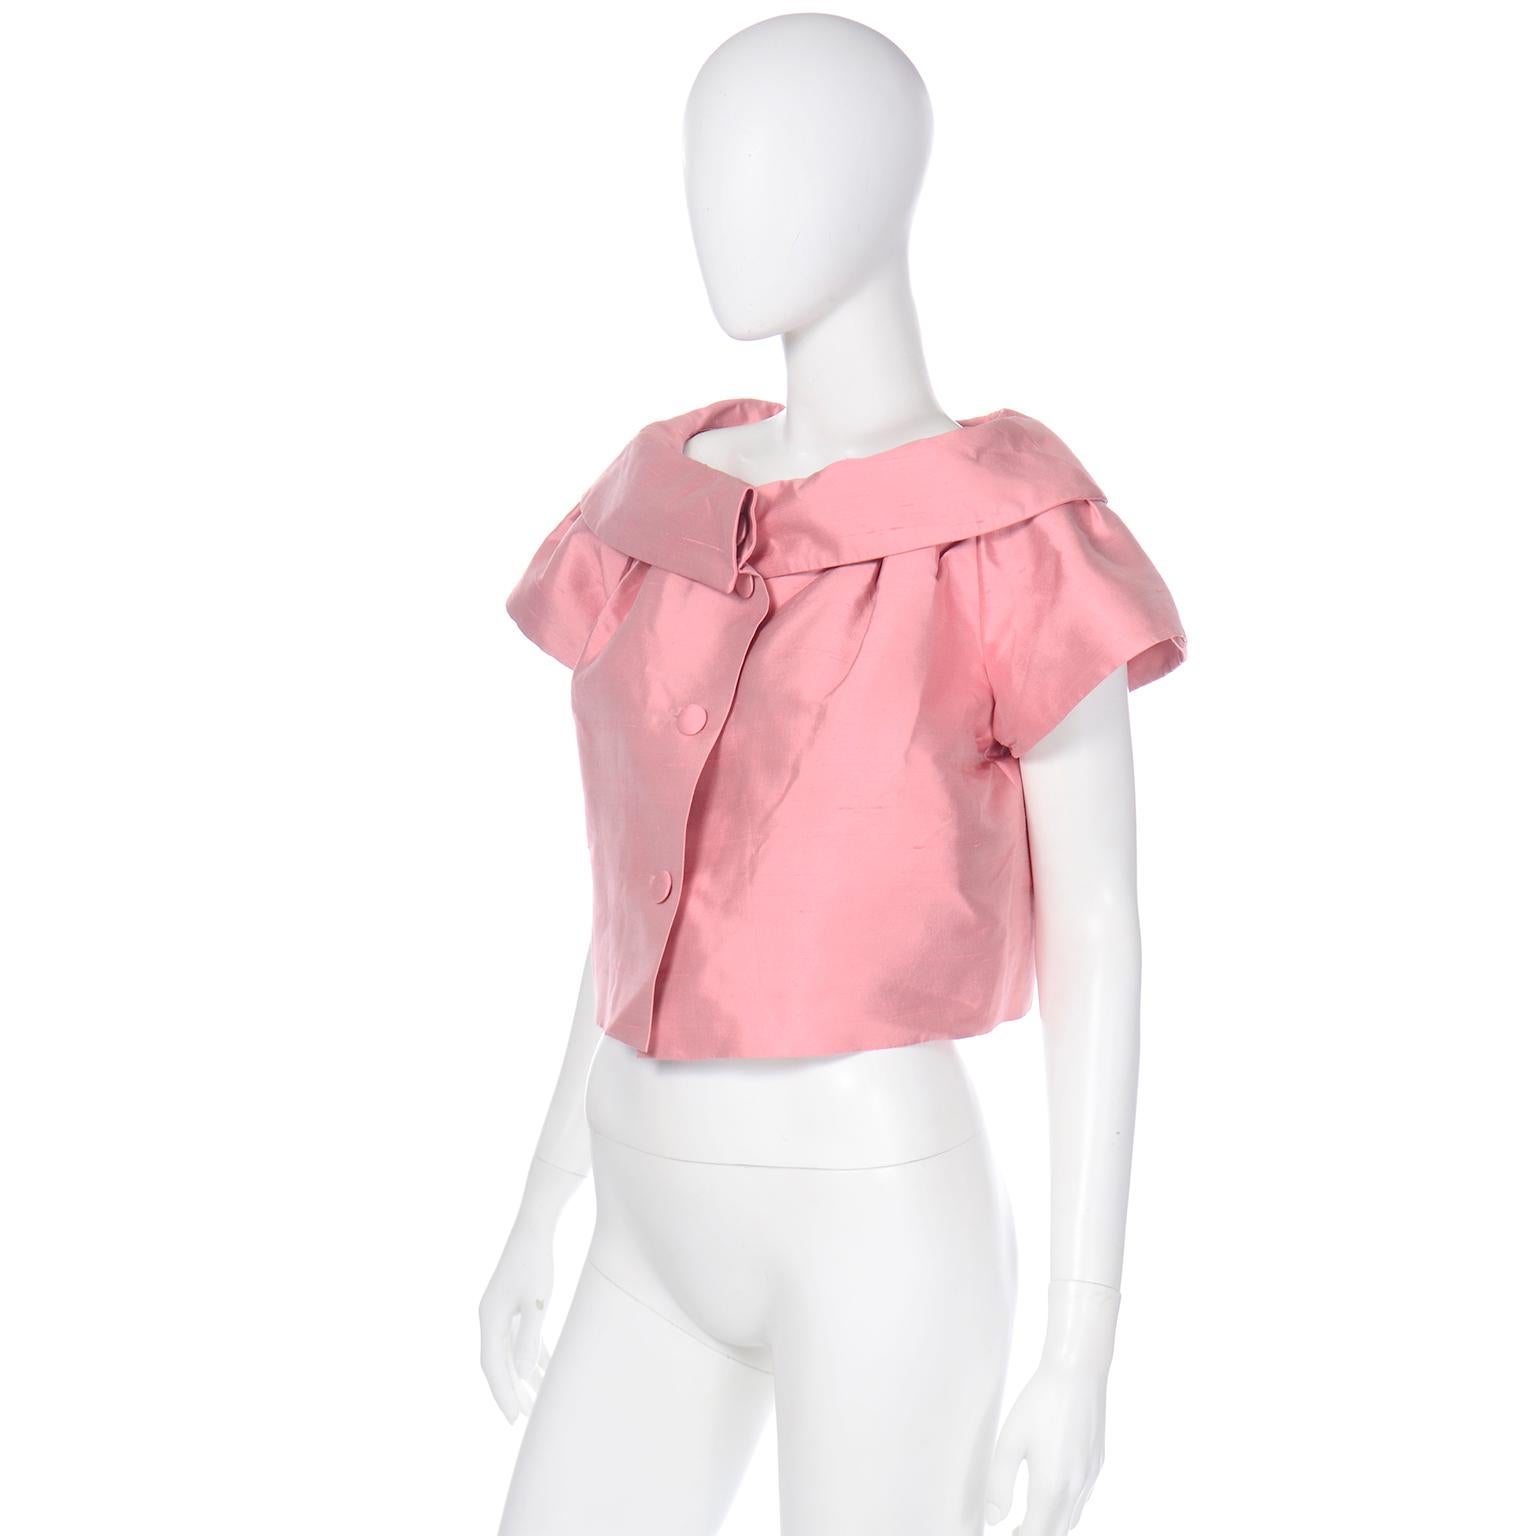 Women's John Galliano for Christian Dior 1960s Inspired Pink 2008 Vintage Jacket Top